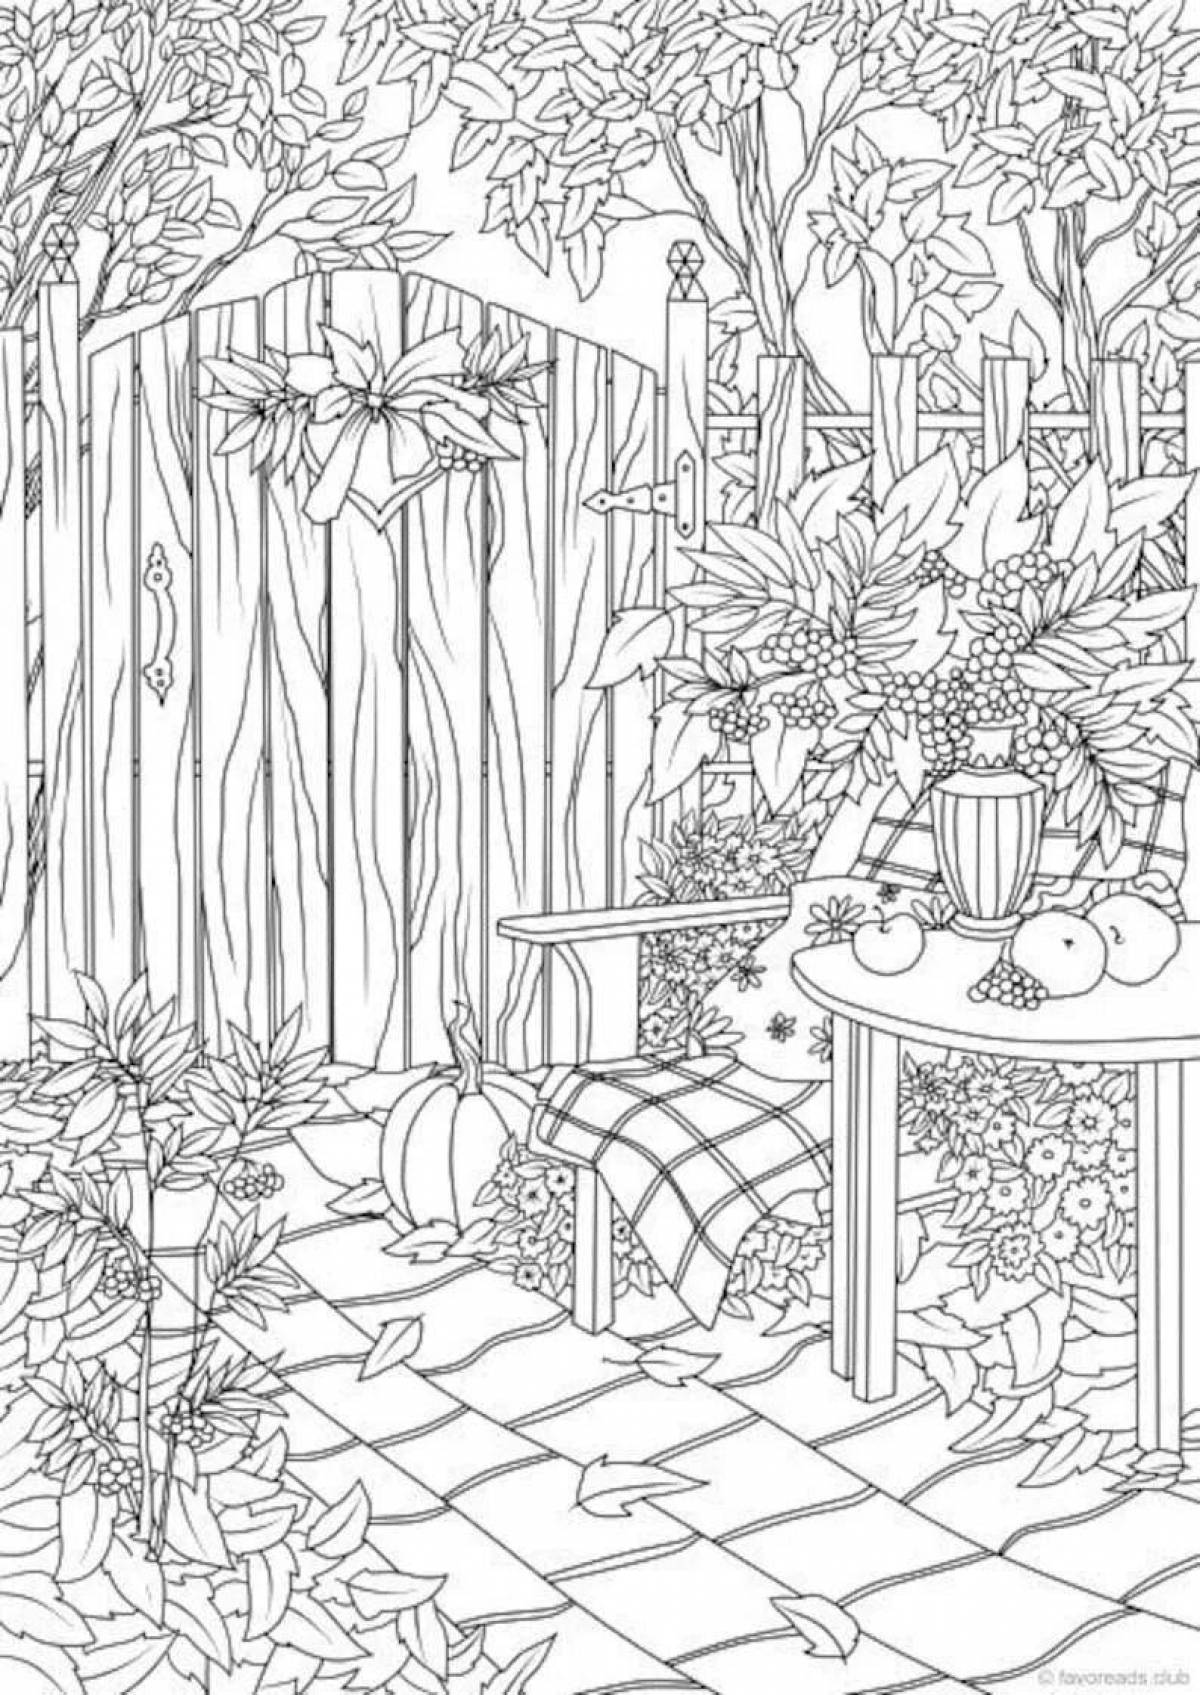 Amazing garden coloring page